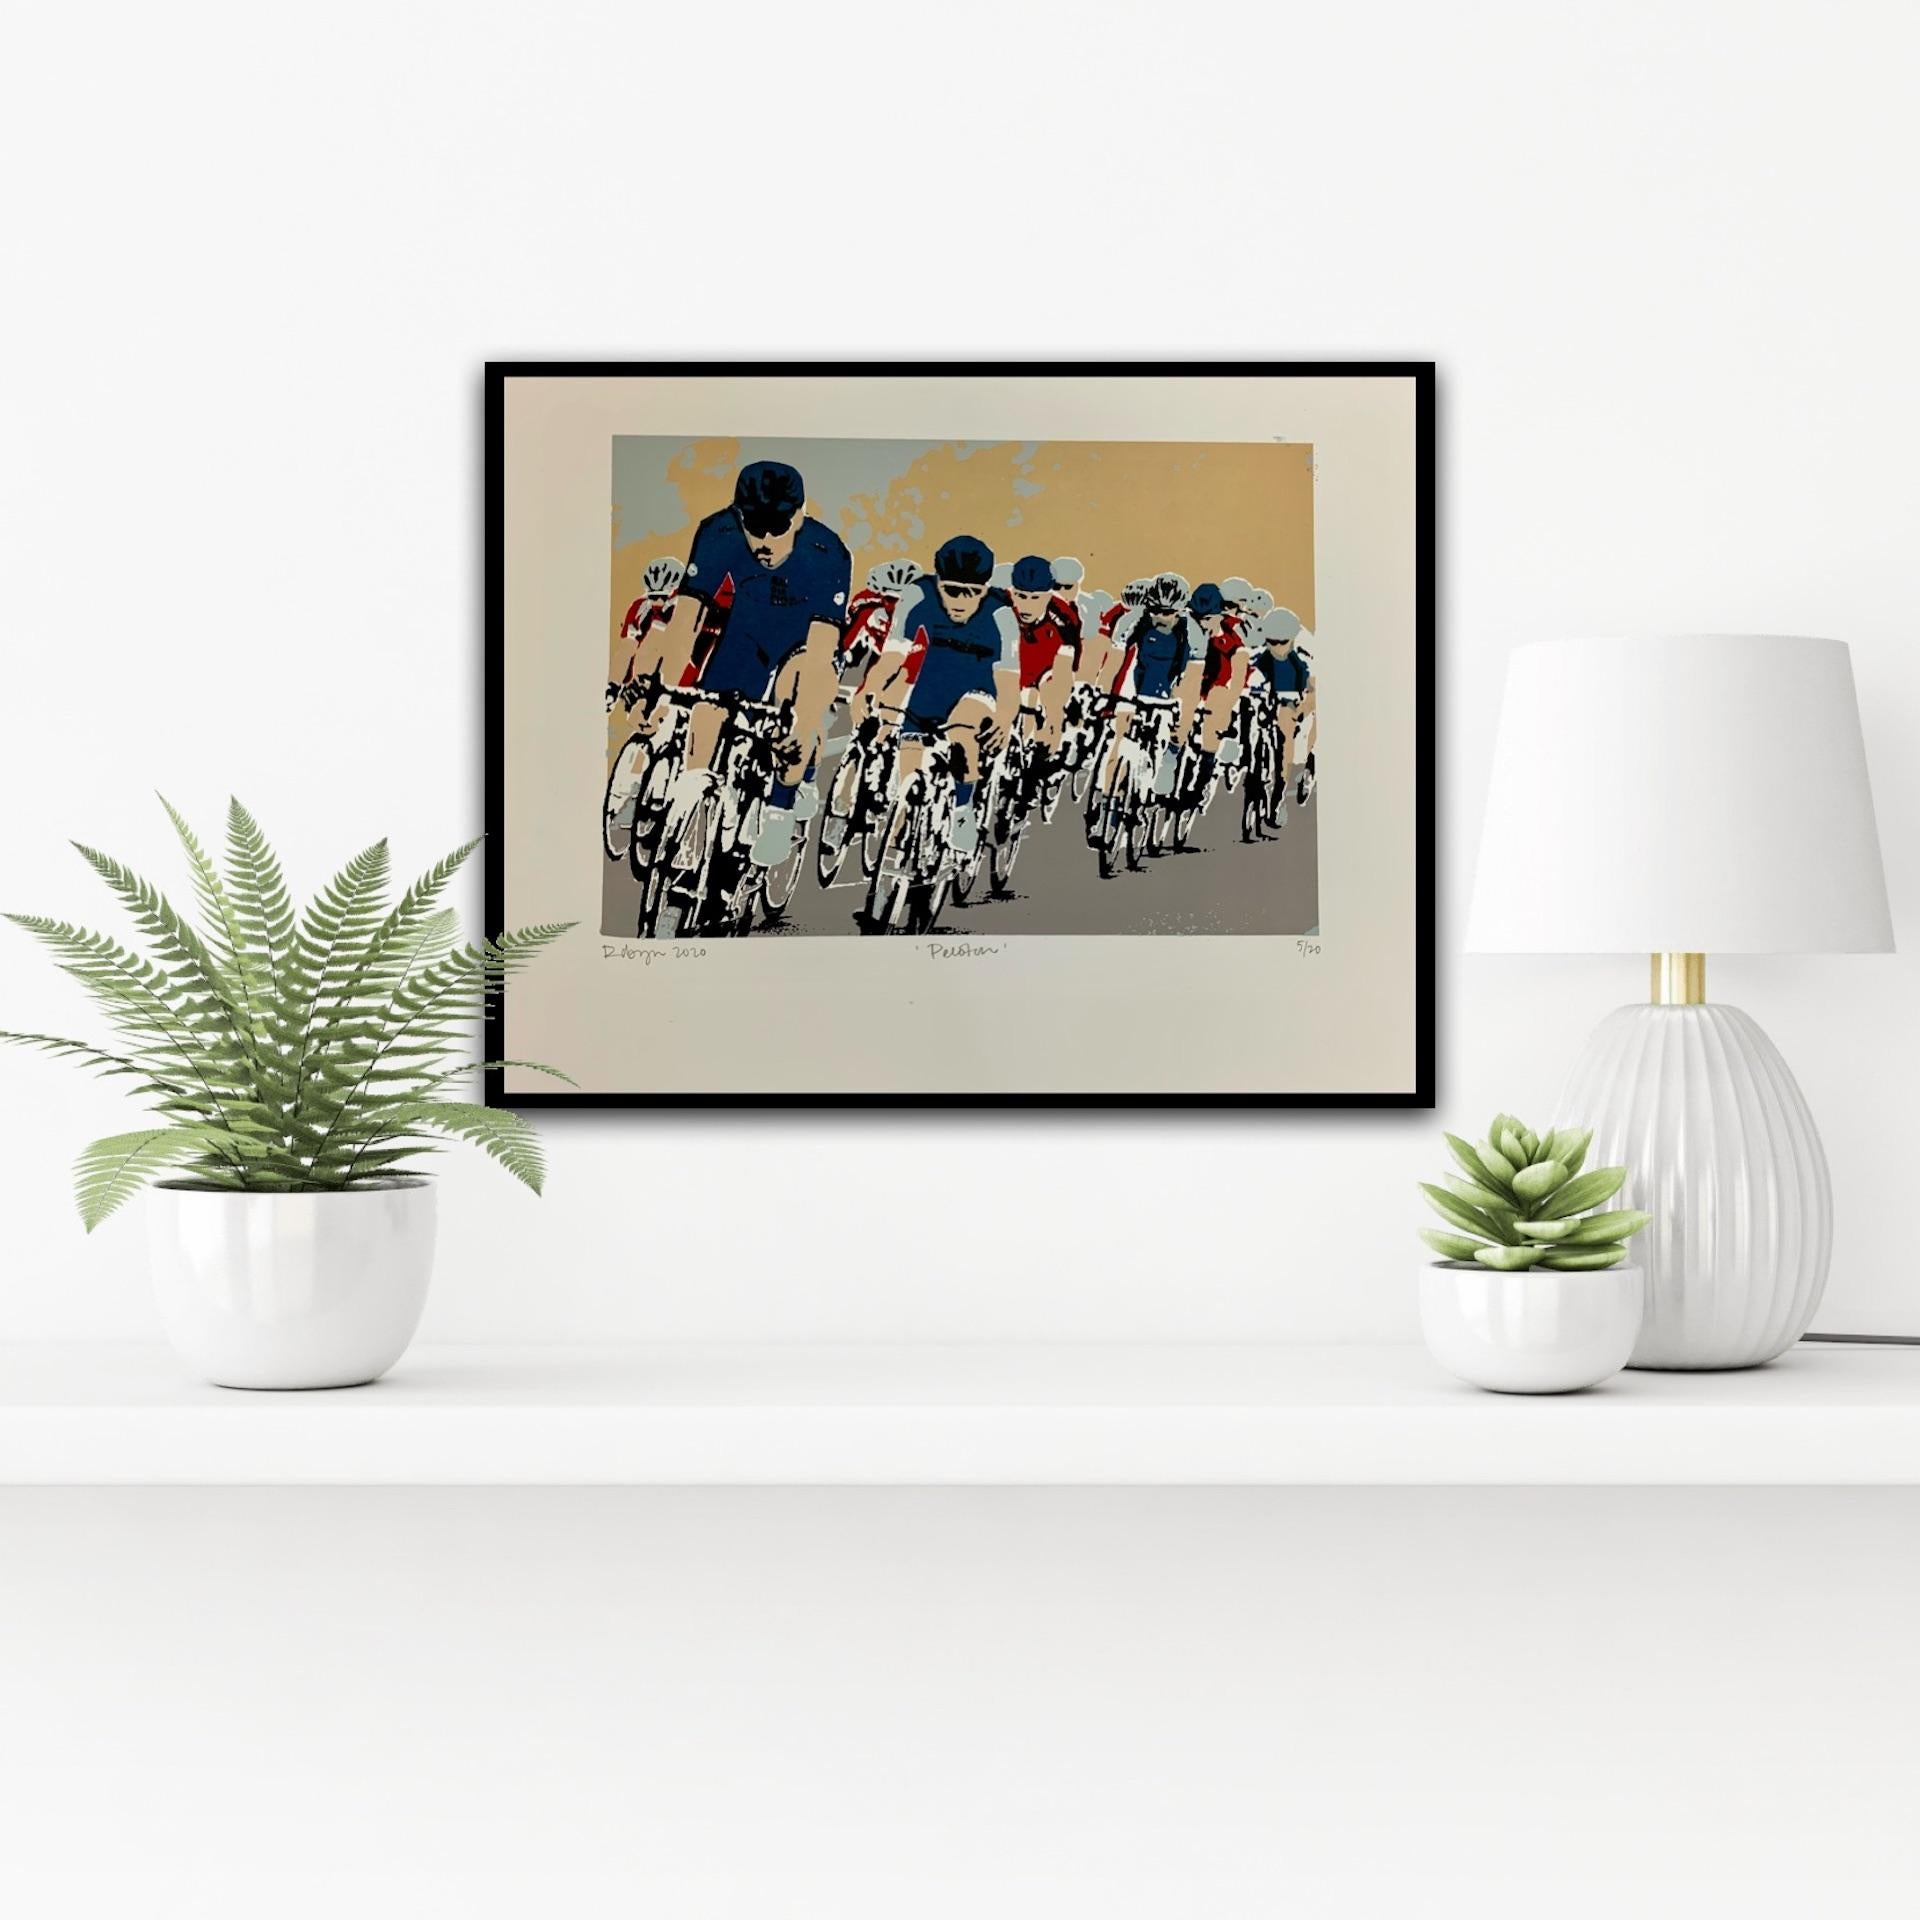 Peloton, Robyn Forbes, Limited Edition, Cycling Print, Athletics Sport Artwork - Brown Figurative Print by robyn forbes